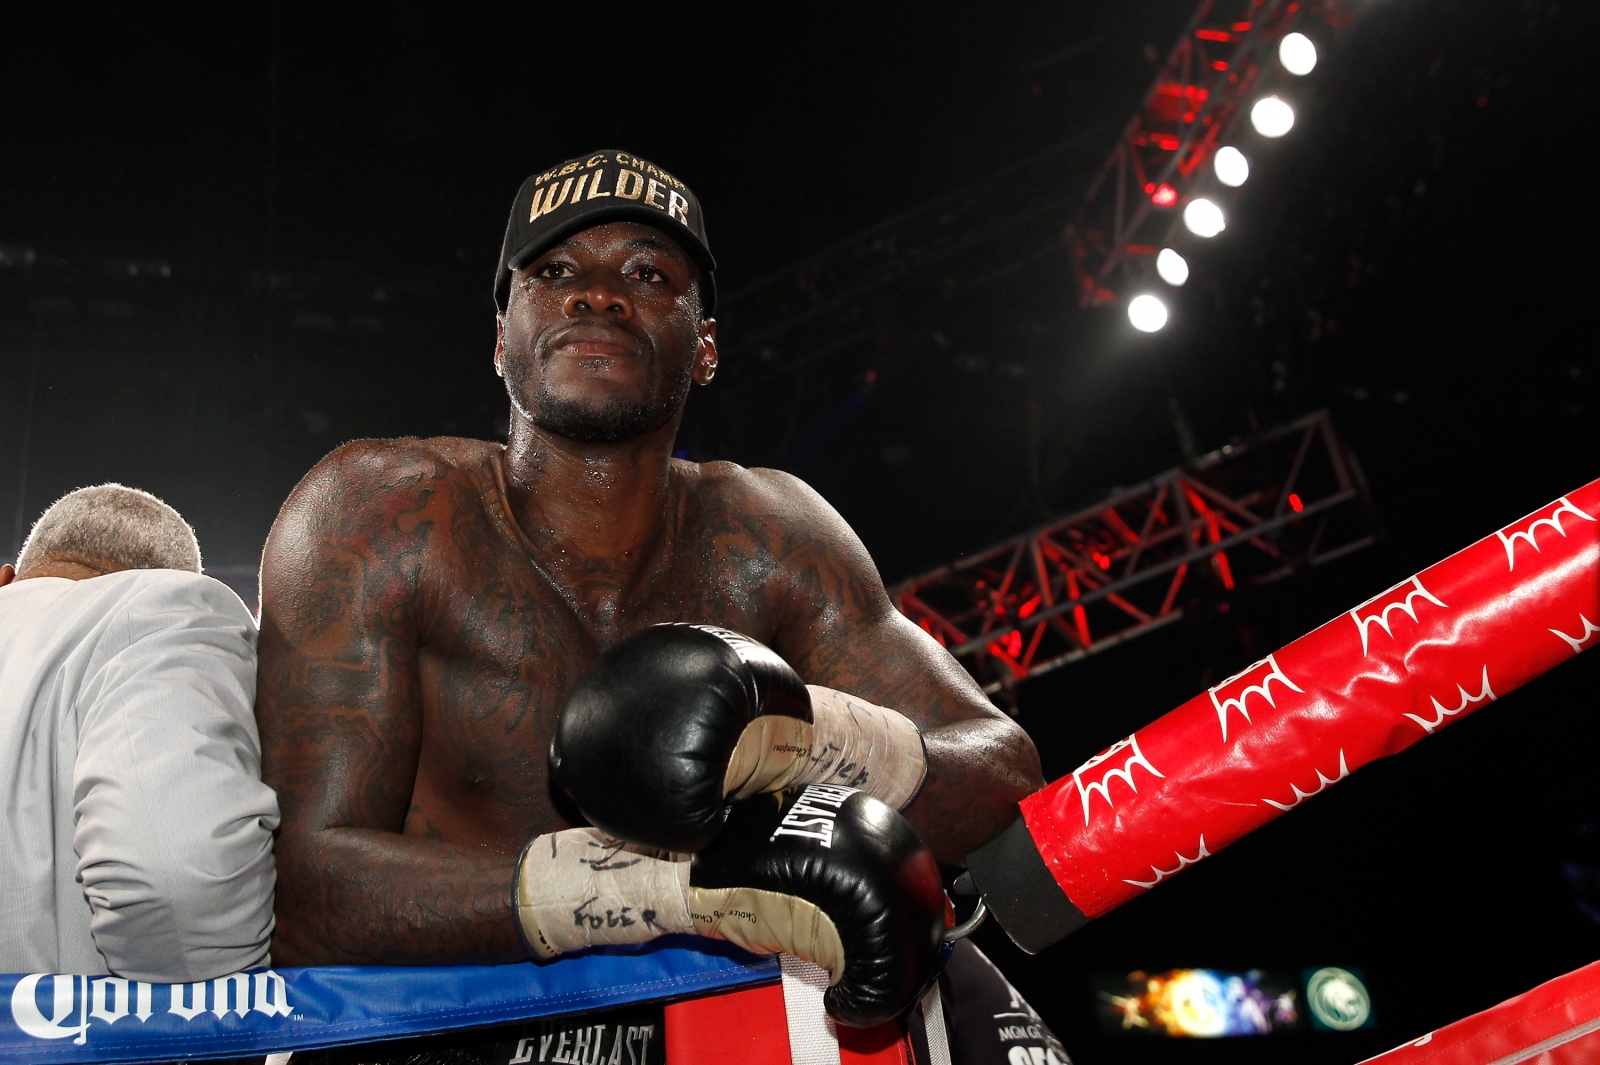 Deontay Wilder says he is 'in a league of my own' when compared to Anthony Joshua